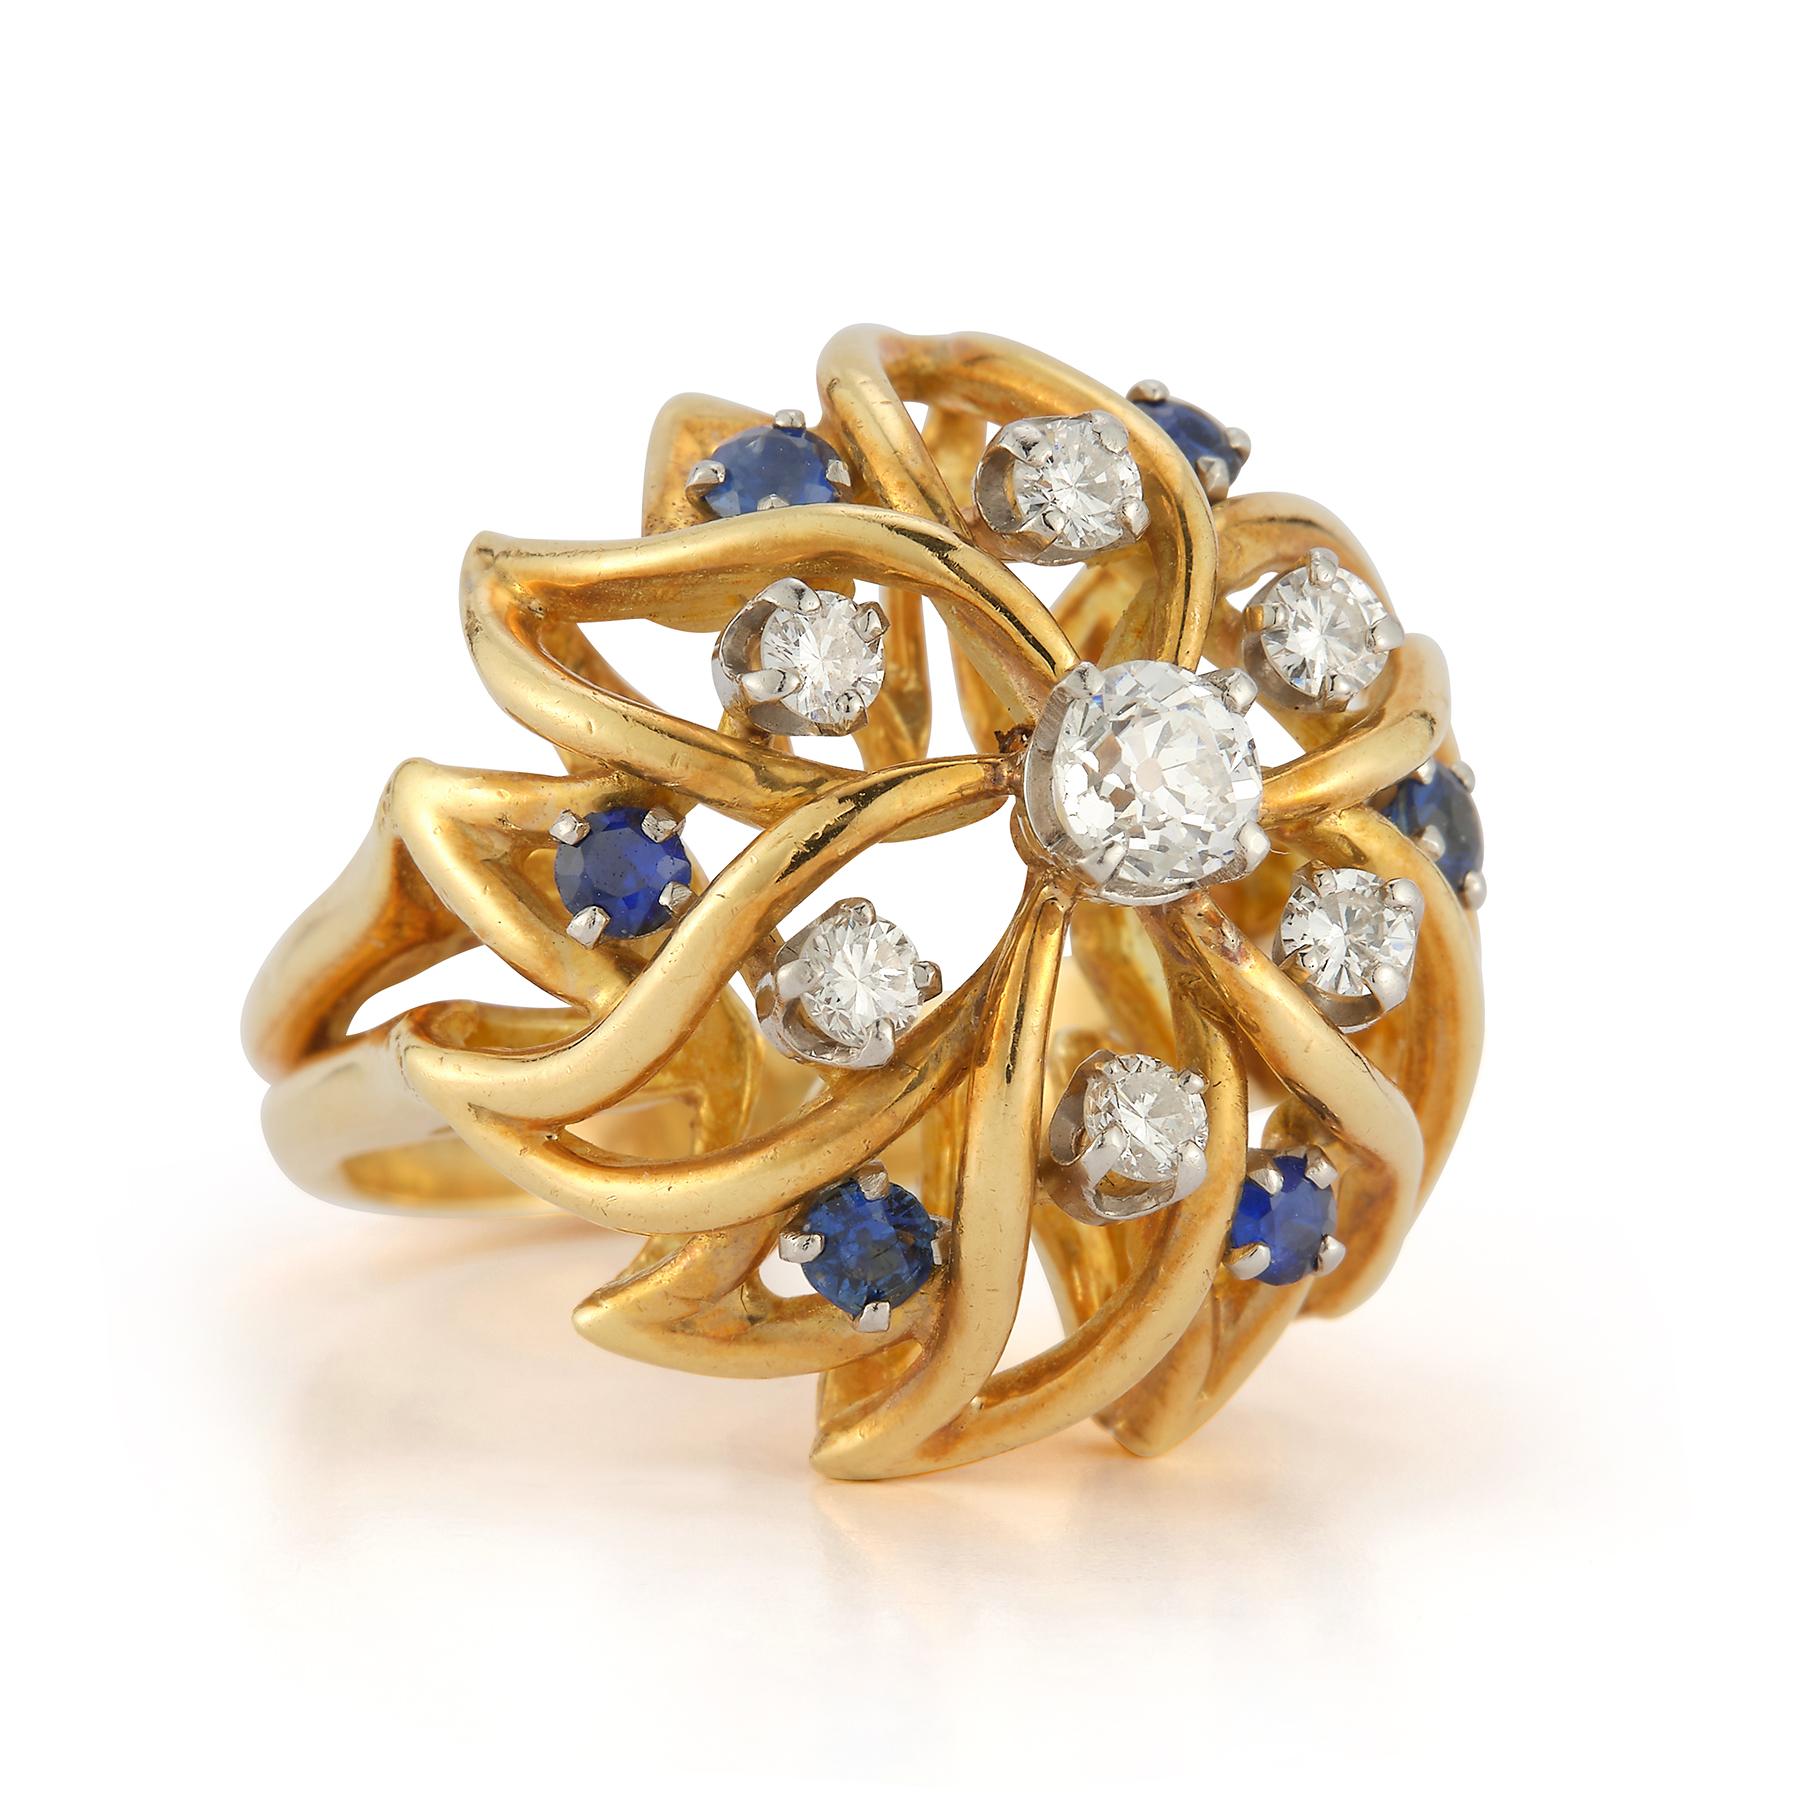 Diamond & Sapphire Dome Ring

Ring Size: 5.75

Resizable free of charge 

Metal Type: 18k yellow gold 